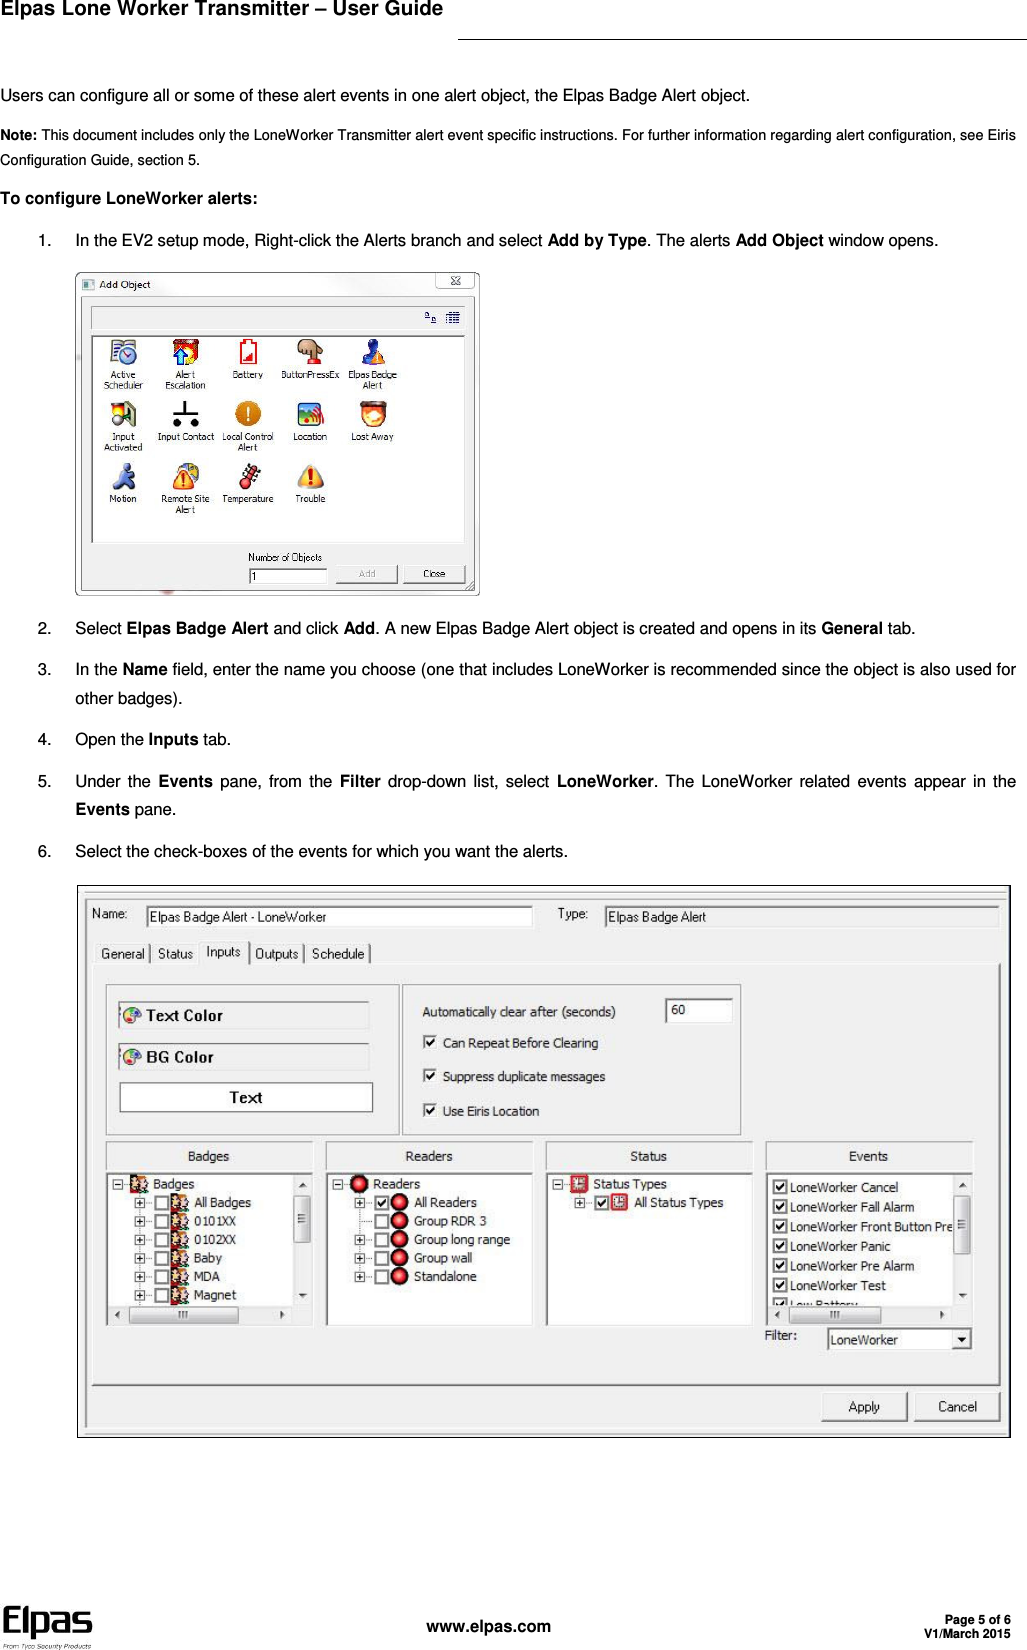 Elpas Lone Worker Transmitter – User Guide    www.elpas.com Page 5 of 6 V1/March 2015   Users can configure all or some of these alert events in one alert object, the Elpas Badge Alert object. Note: This document includes only the LoneWorker Transmitter alert event specific instructions. For further information regarding alert configuration, see Eiris Configuration Guide, section 5. To configure LoneWorker alerts: 1.  In the EV2 setup mode, Right-click the Alerts branch and select Add by Type. The alerts Add Object window opens.  2.  Select Elpas Badge Alert and click Add. A new Elpas Badge Alert object is created and opens in its General tab. 3.  In the Name field, enter the name you choose (one that includes LoneWorker is recommended since the object is also used for other badges). 4.  Open the Inputs tab. 5.  Under the Events pane, from the Filter drop-down list, select  LoneWorker. The  LoneWorker related events  appear  in  the Events pane. 6.  Select the check-boxes of the events for which you want the alerts.   